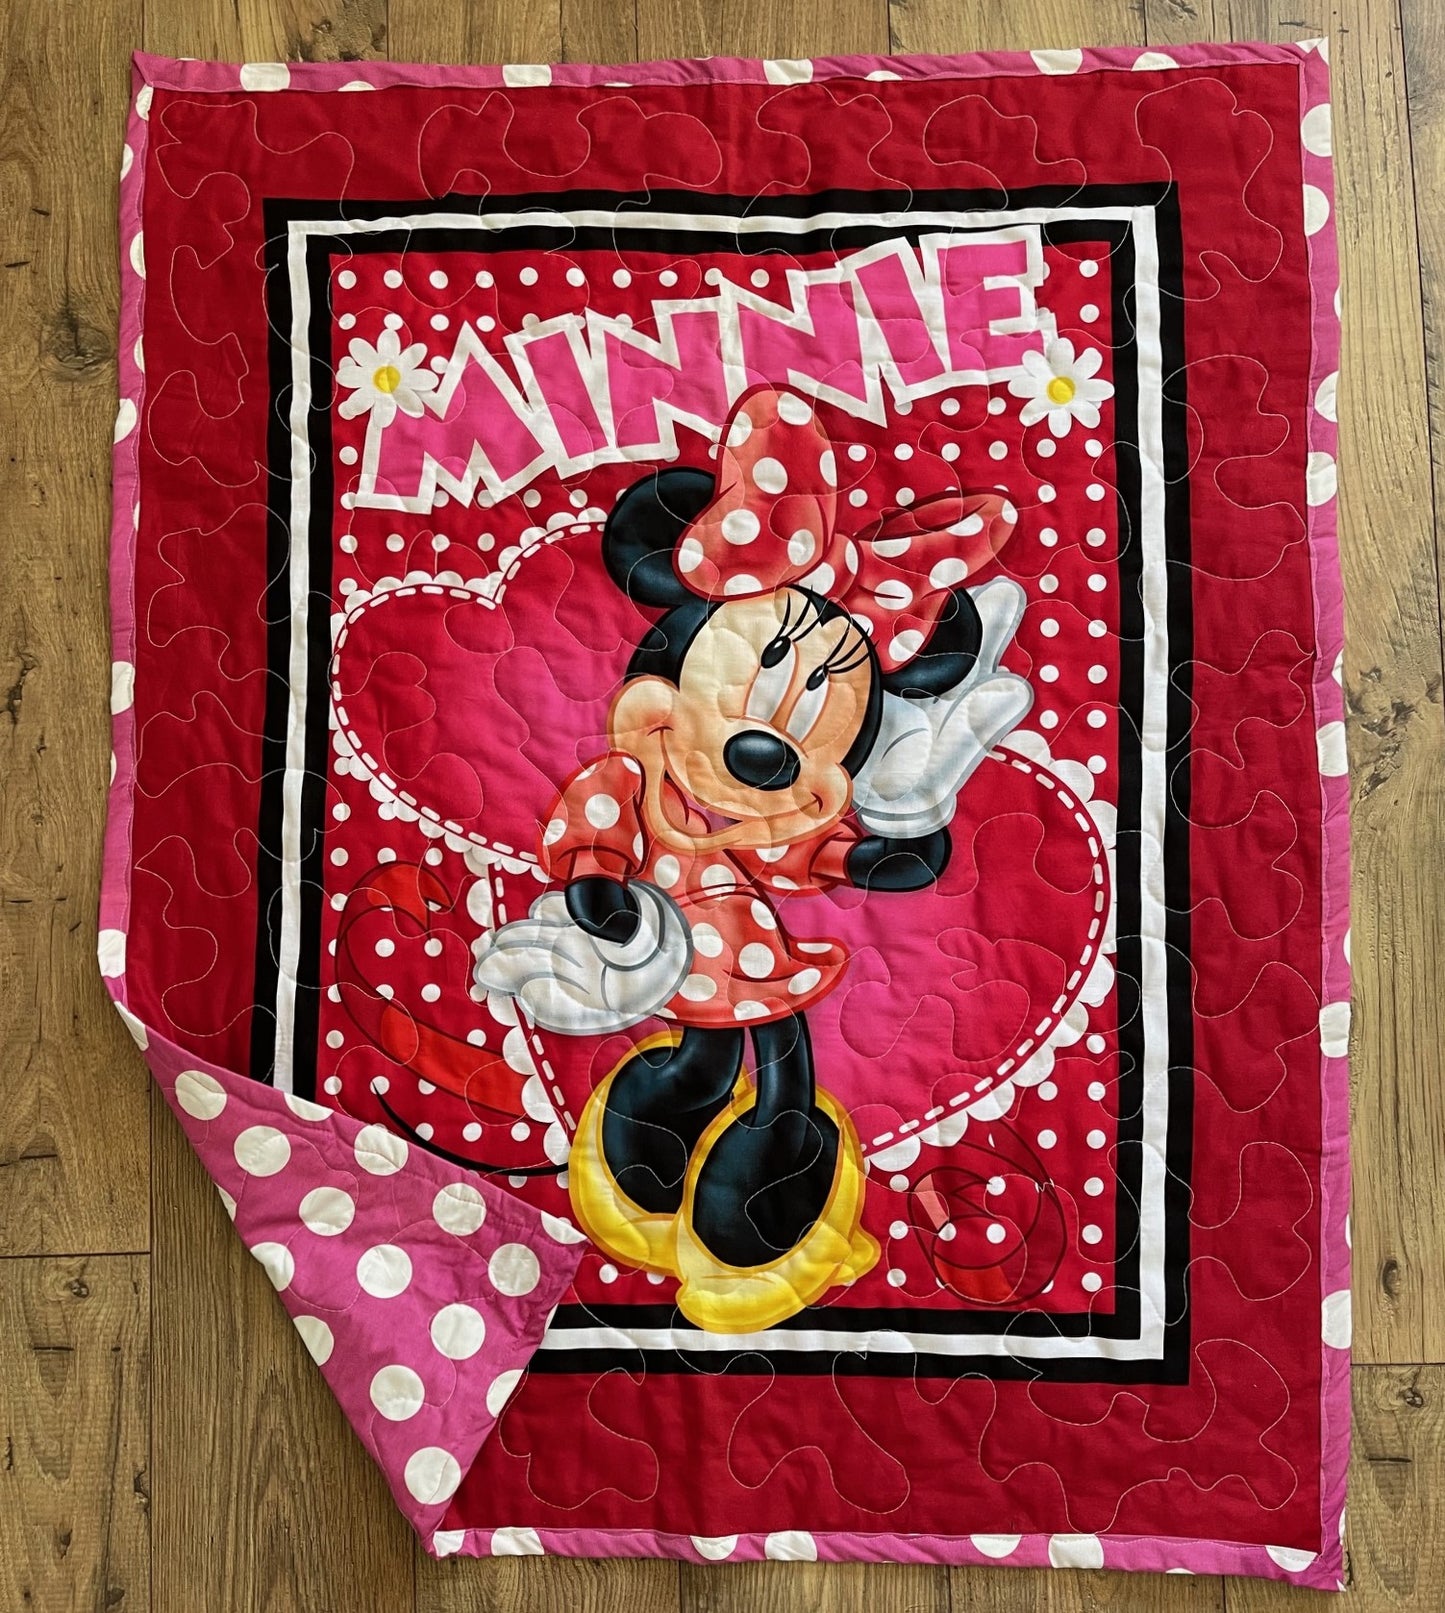 MINNIE MOUSE "LOVE MINNIE HEARTS" Inspired QUILTED BLANKET